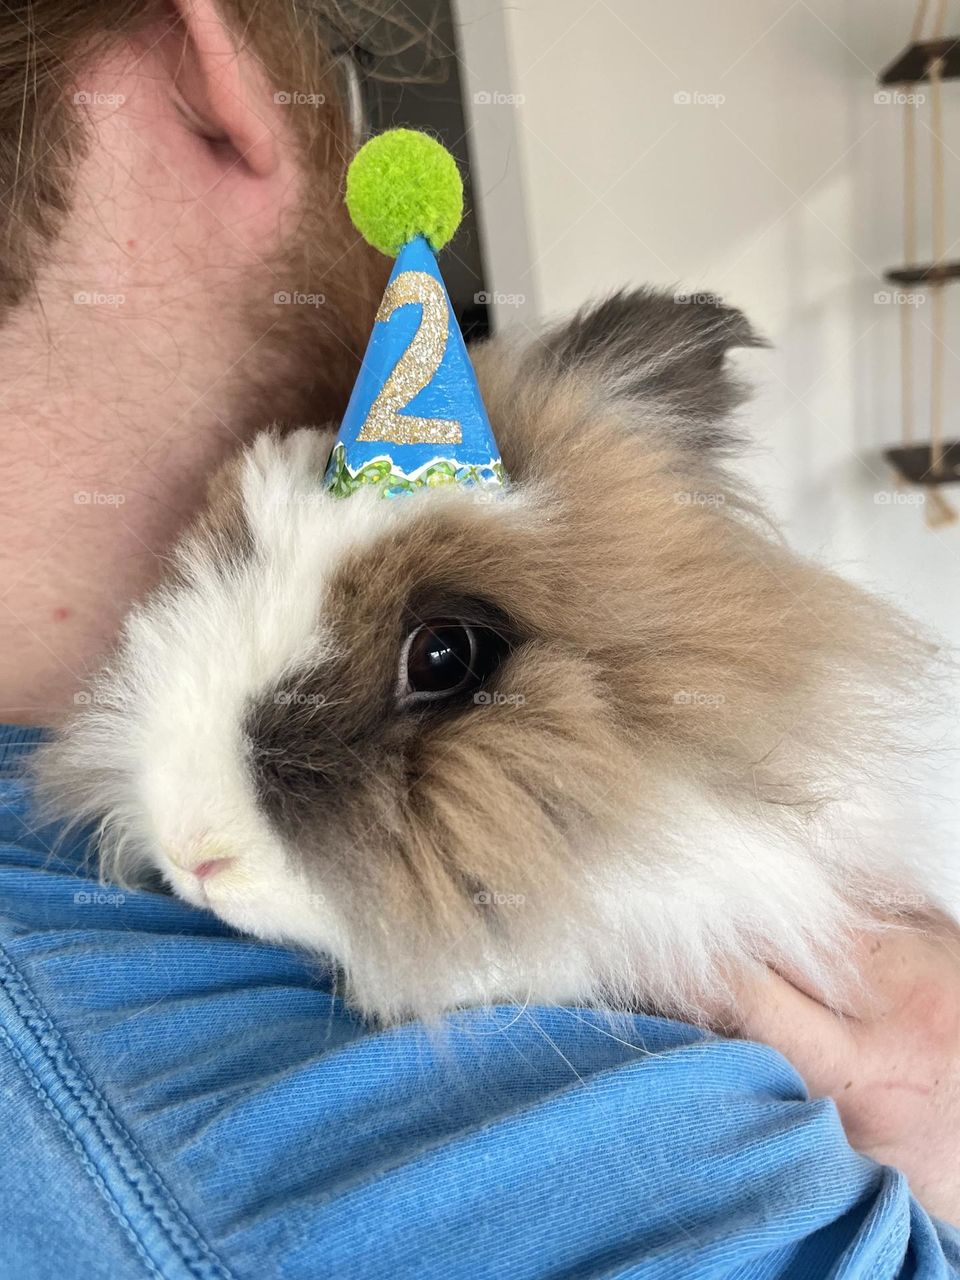 Frank the bunny on his second birthday. He loves snuggling with papa 